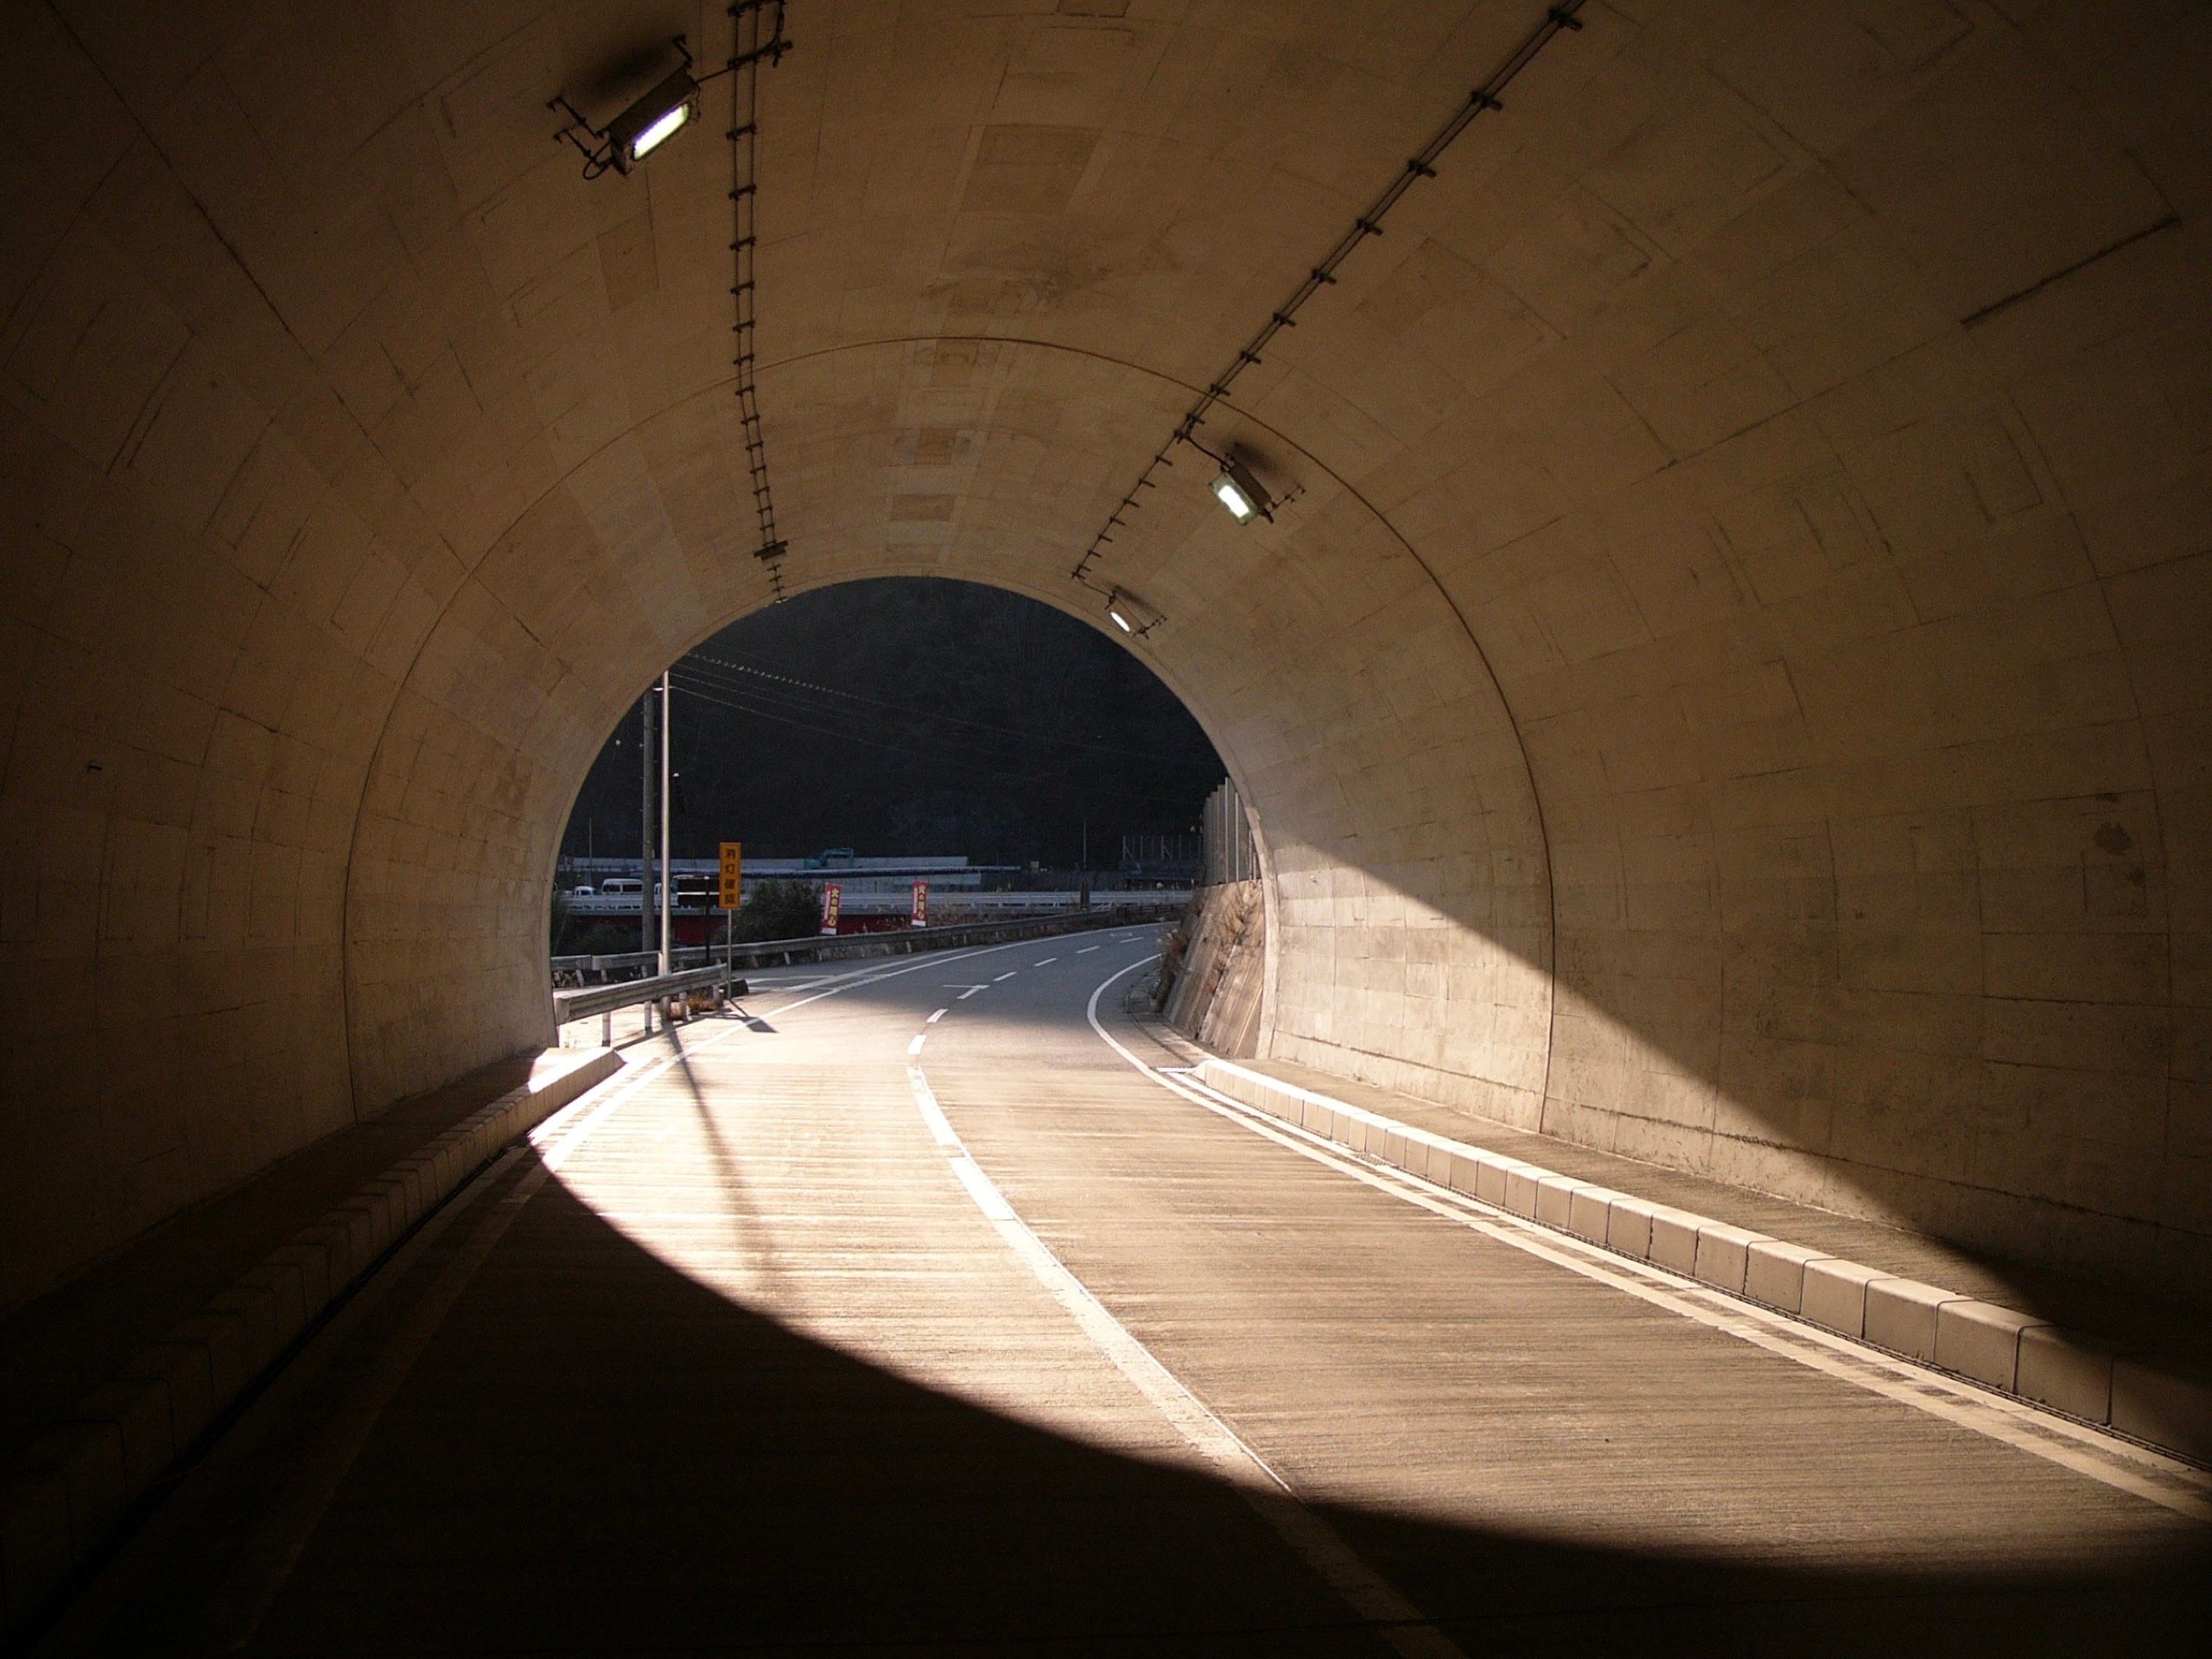 Looking at the sunlit exit of a tunnel from inside the tunnel.